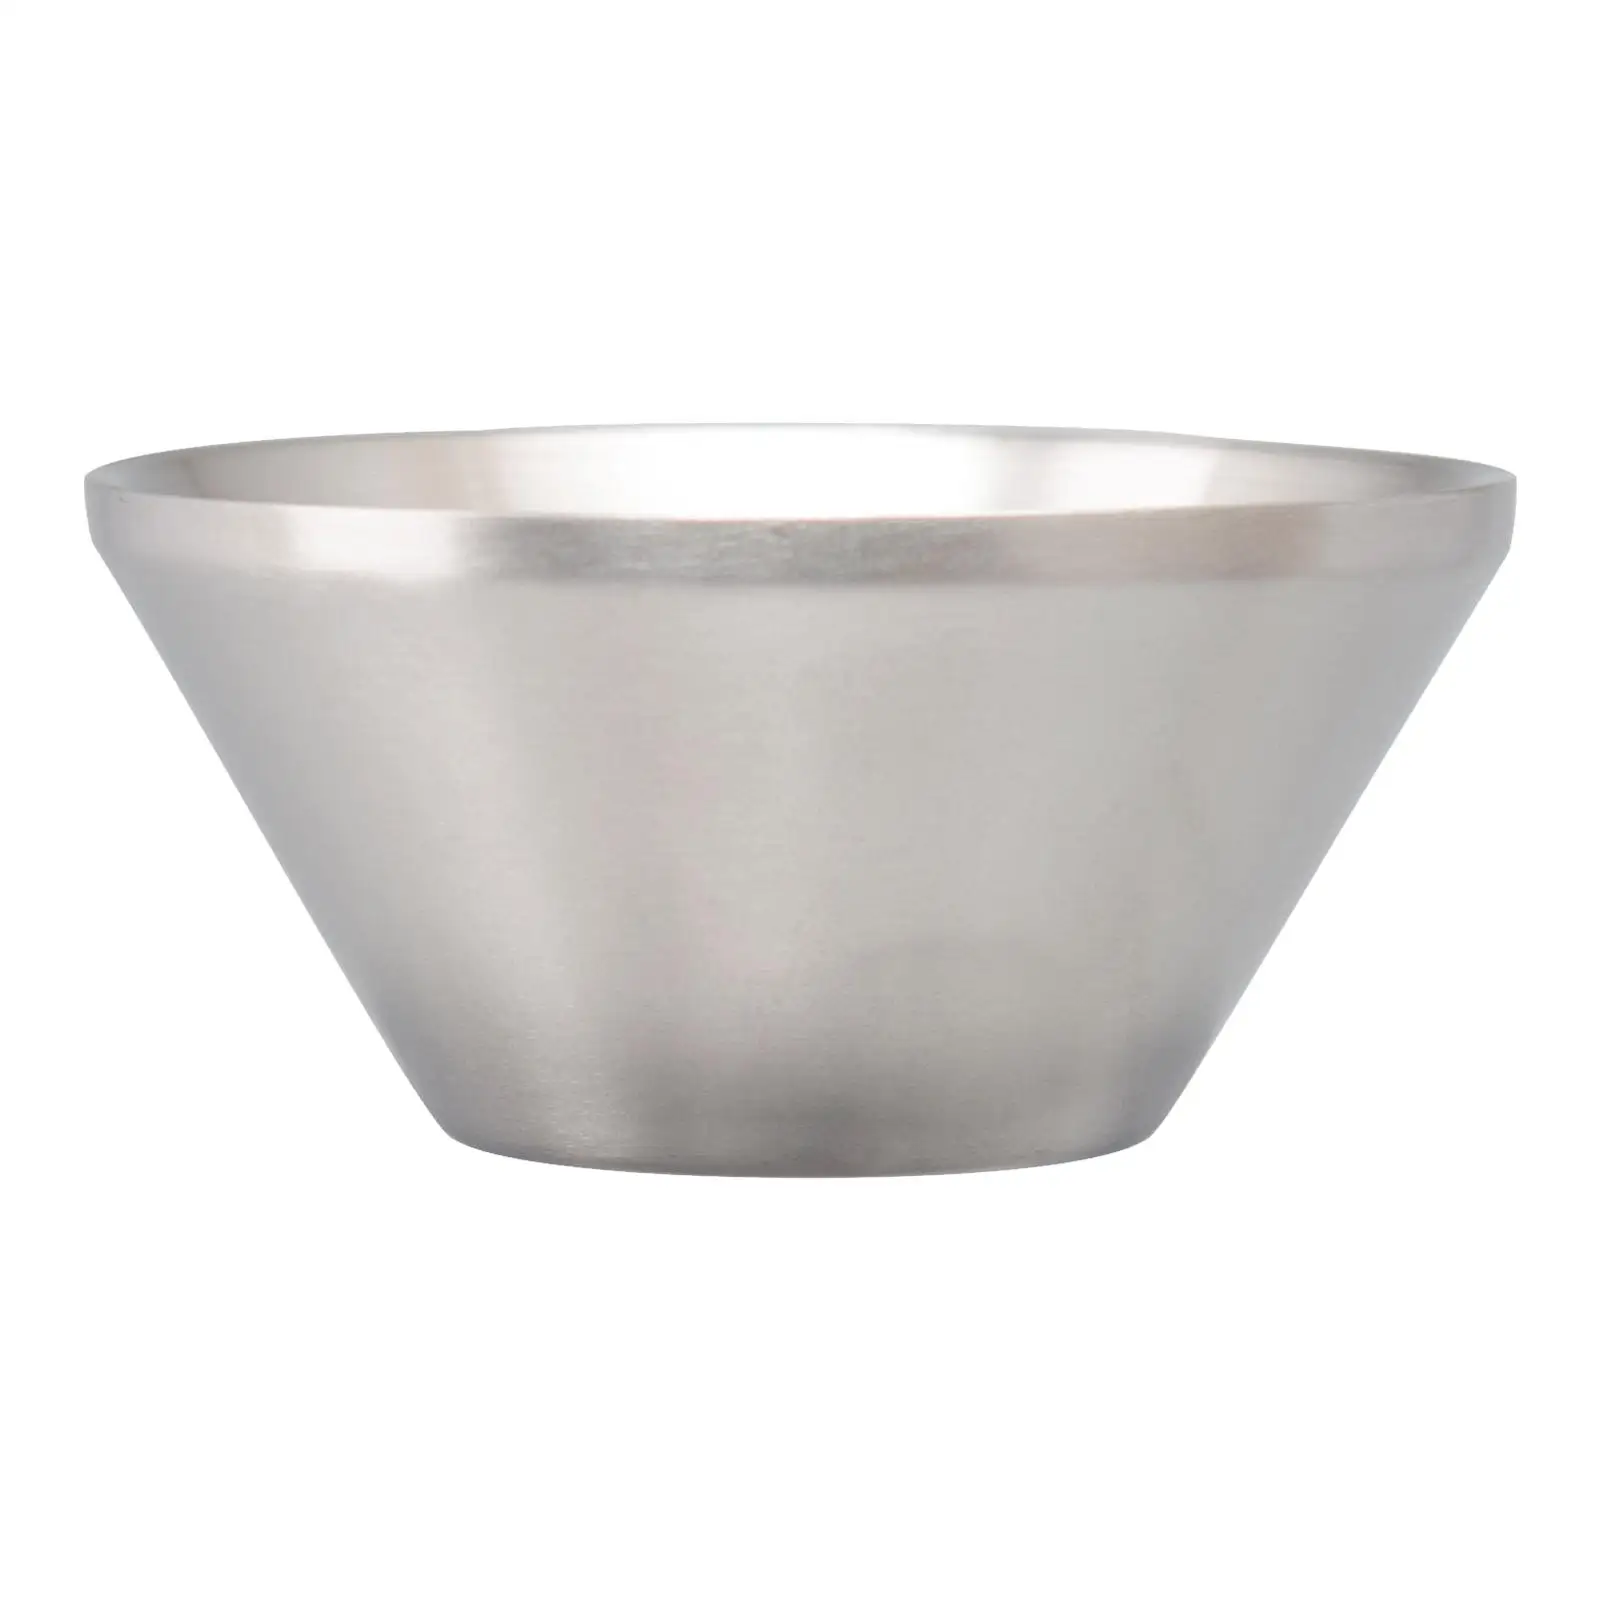 Stainless Steel Shaving Bowl Shave Soap Cup Durable Tactile Texture Shaving Lather Bowl Provides A Luxurious Shave Experience